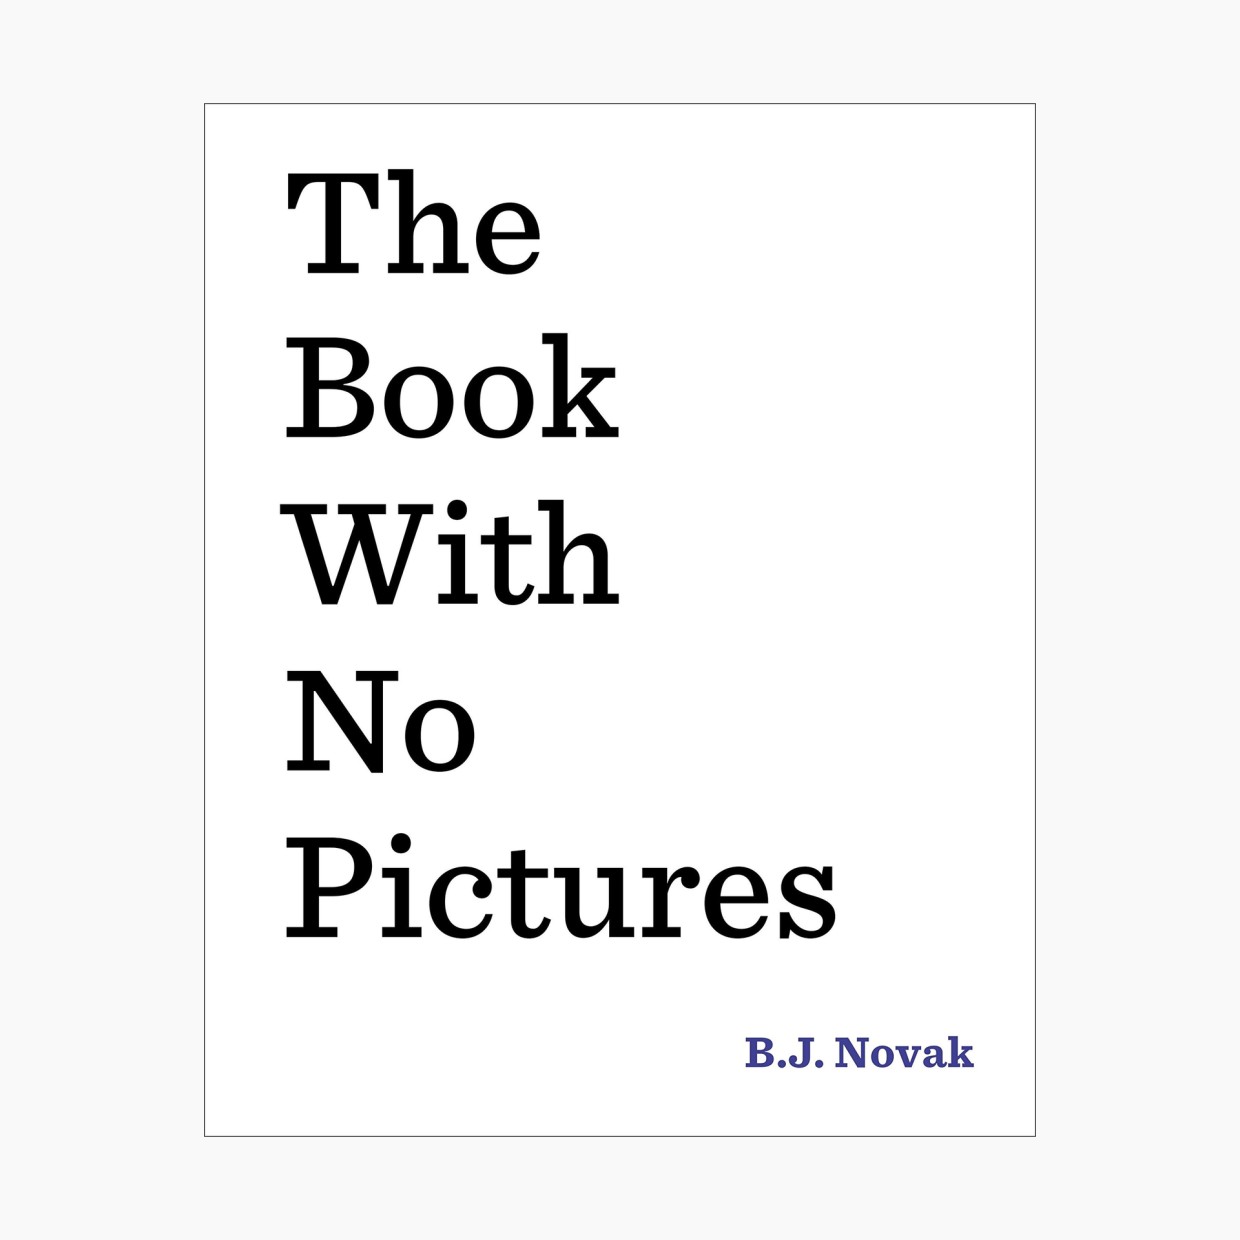 The Book With No Pictures.